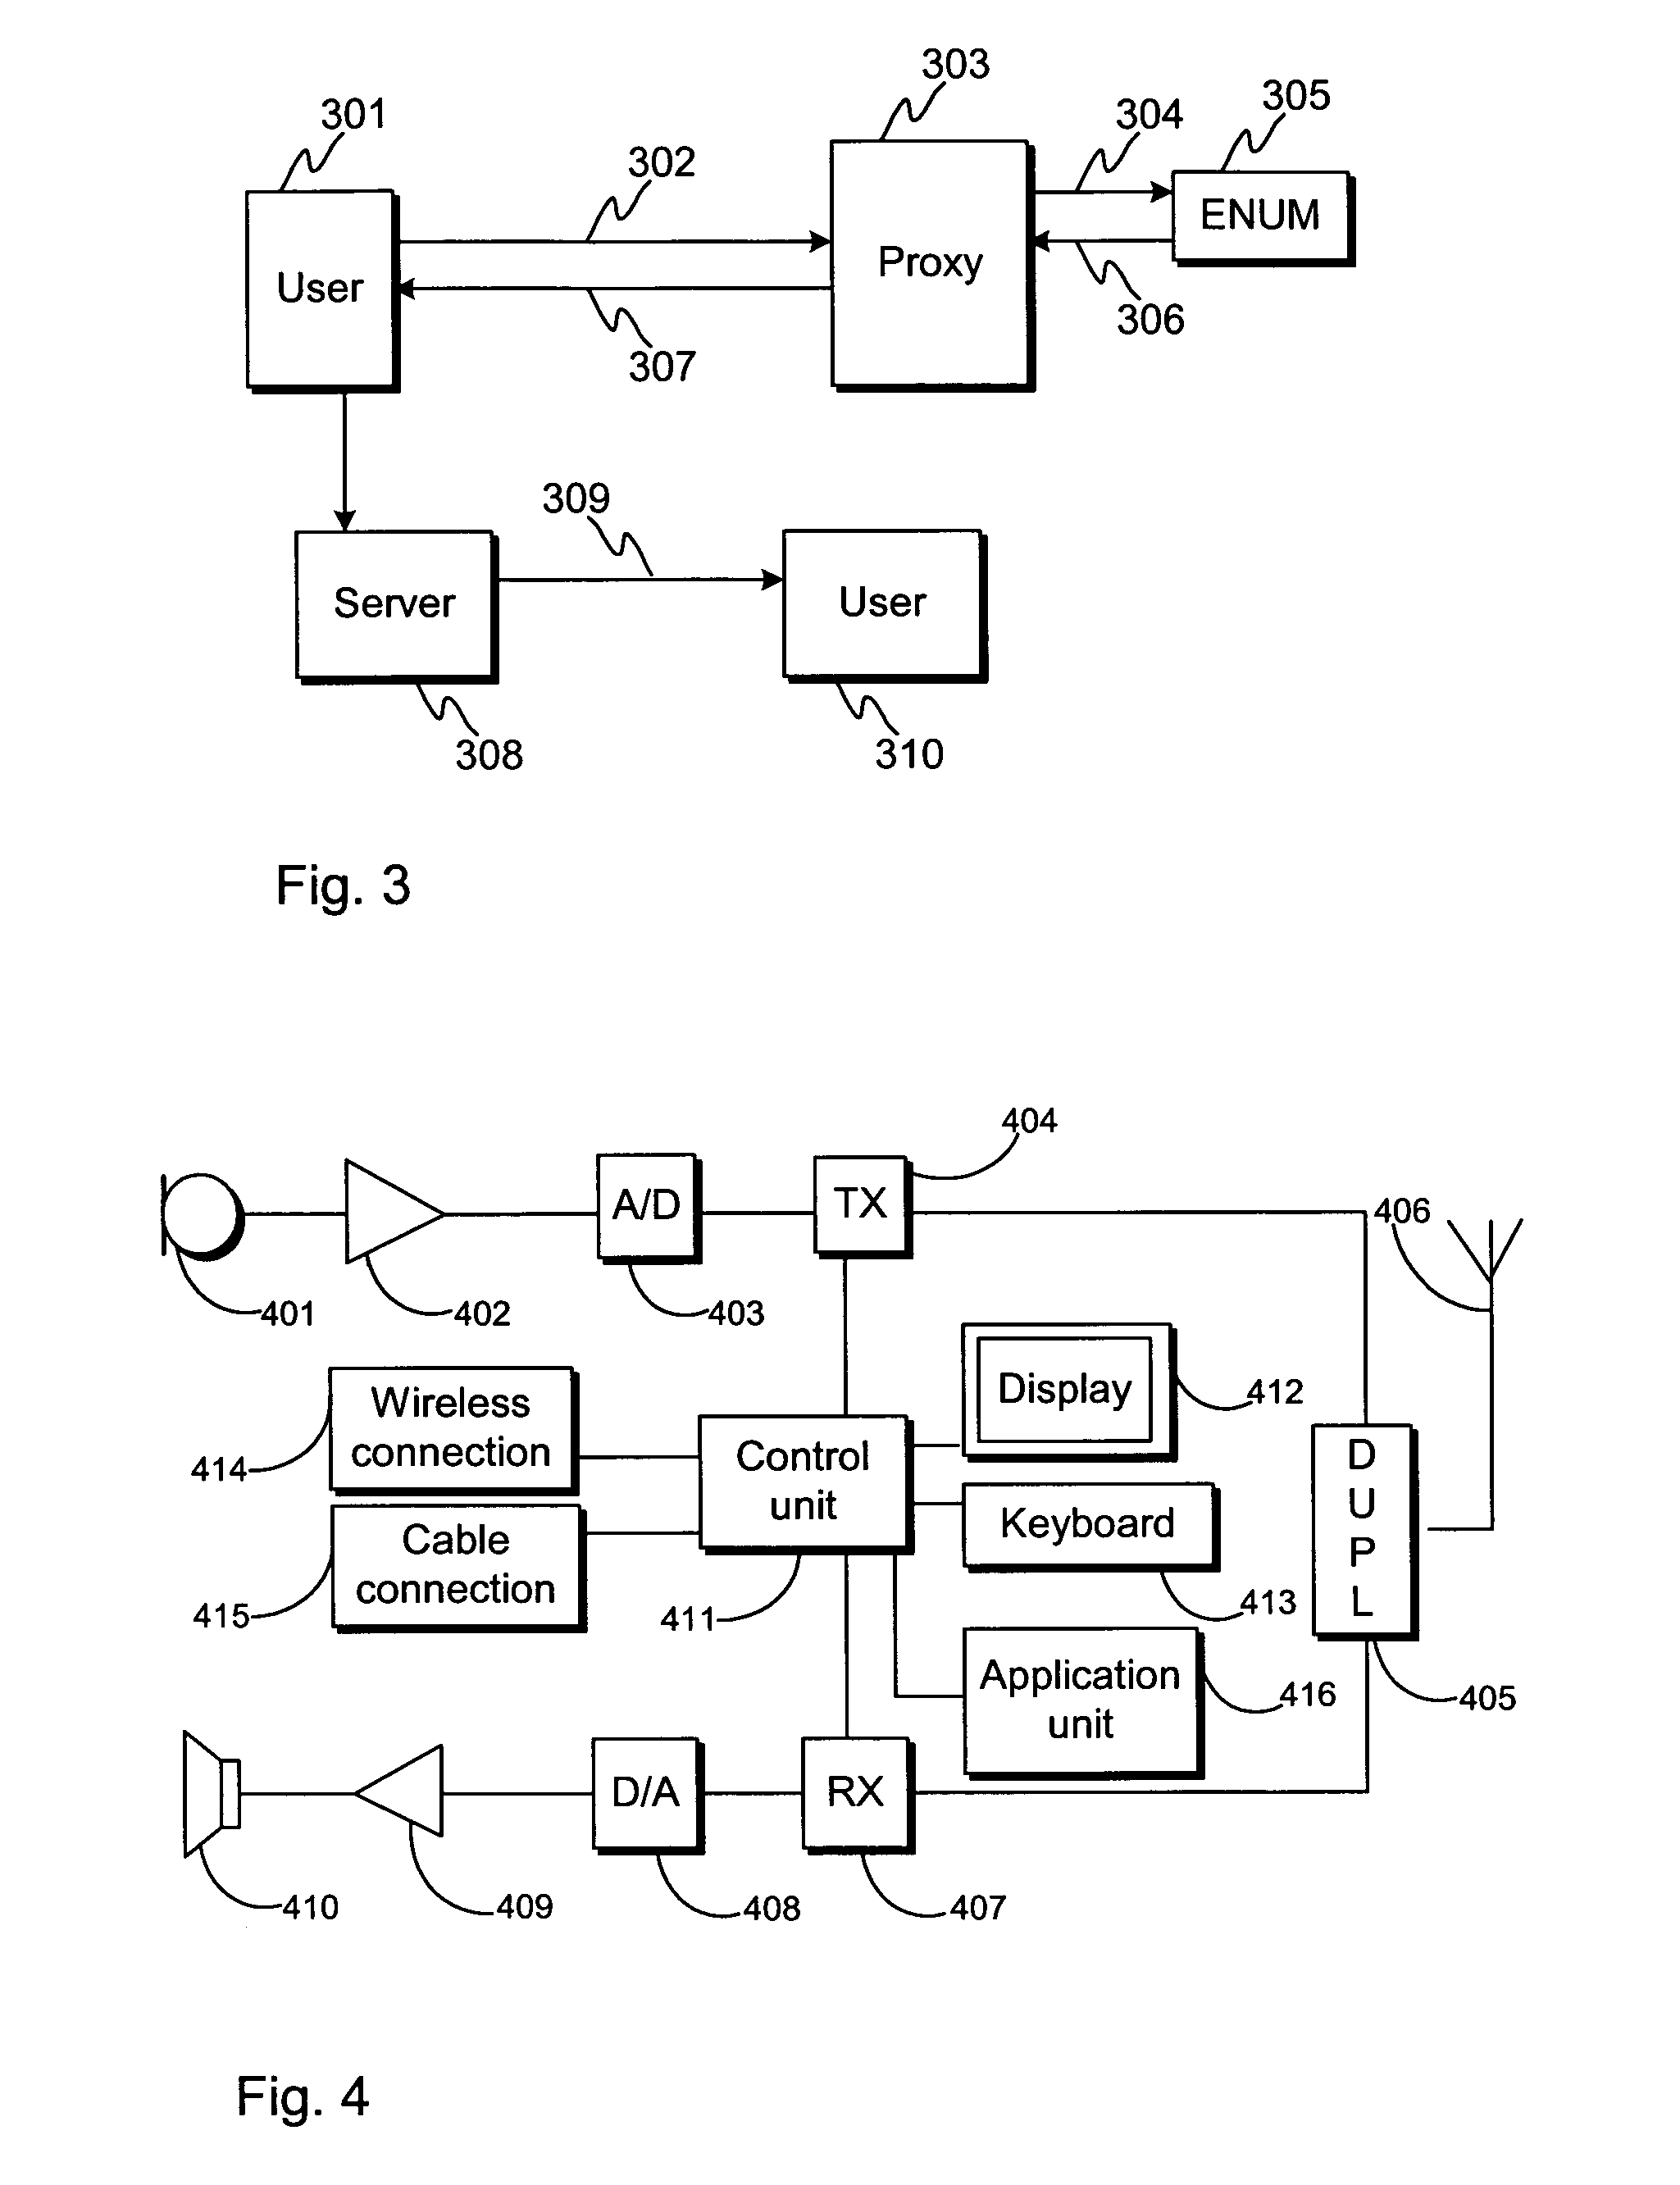 Method and an apparatus for enhancing messaging